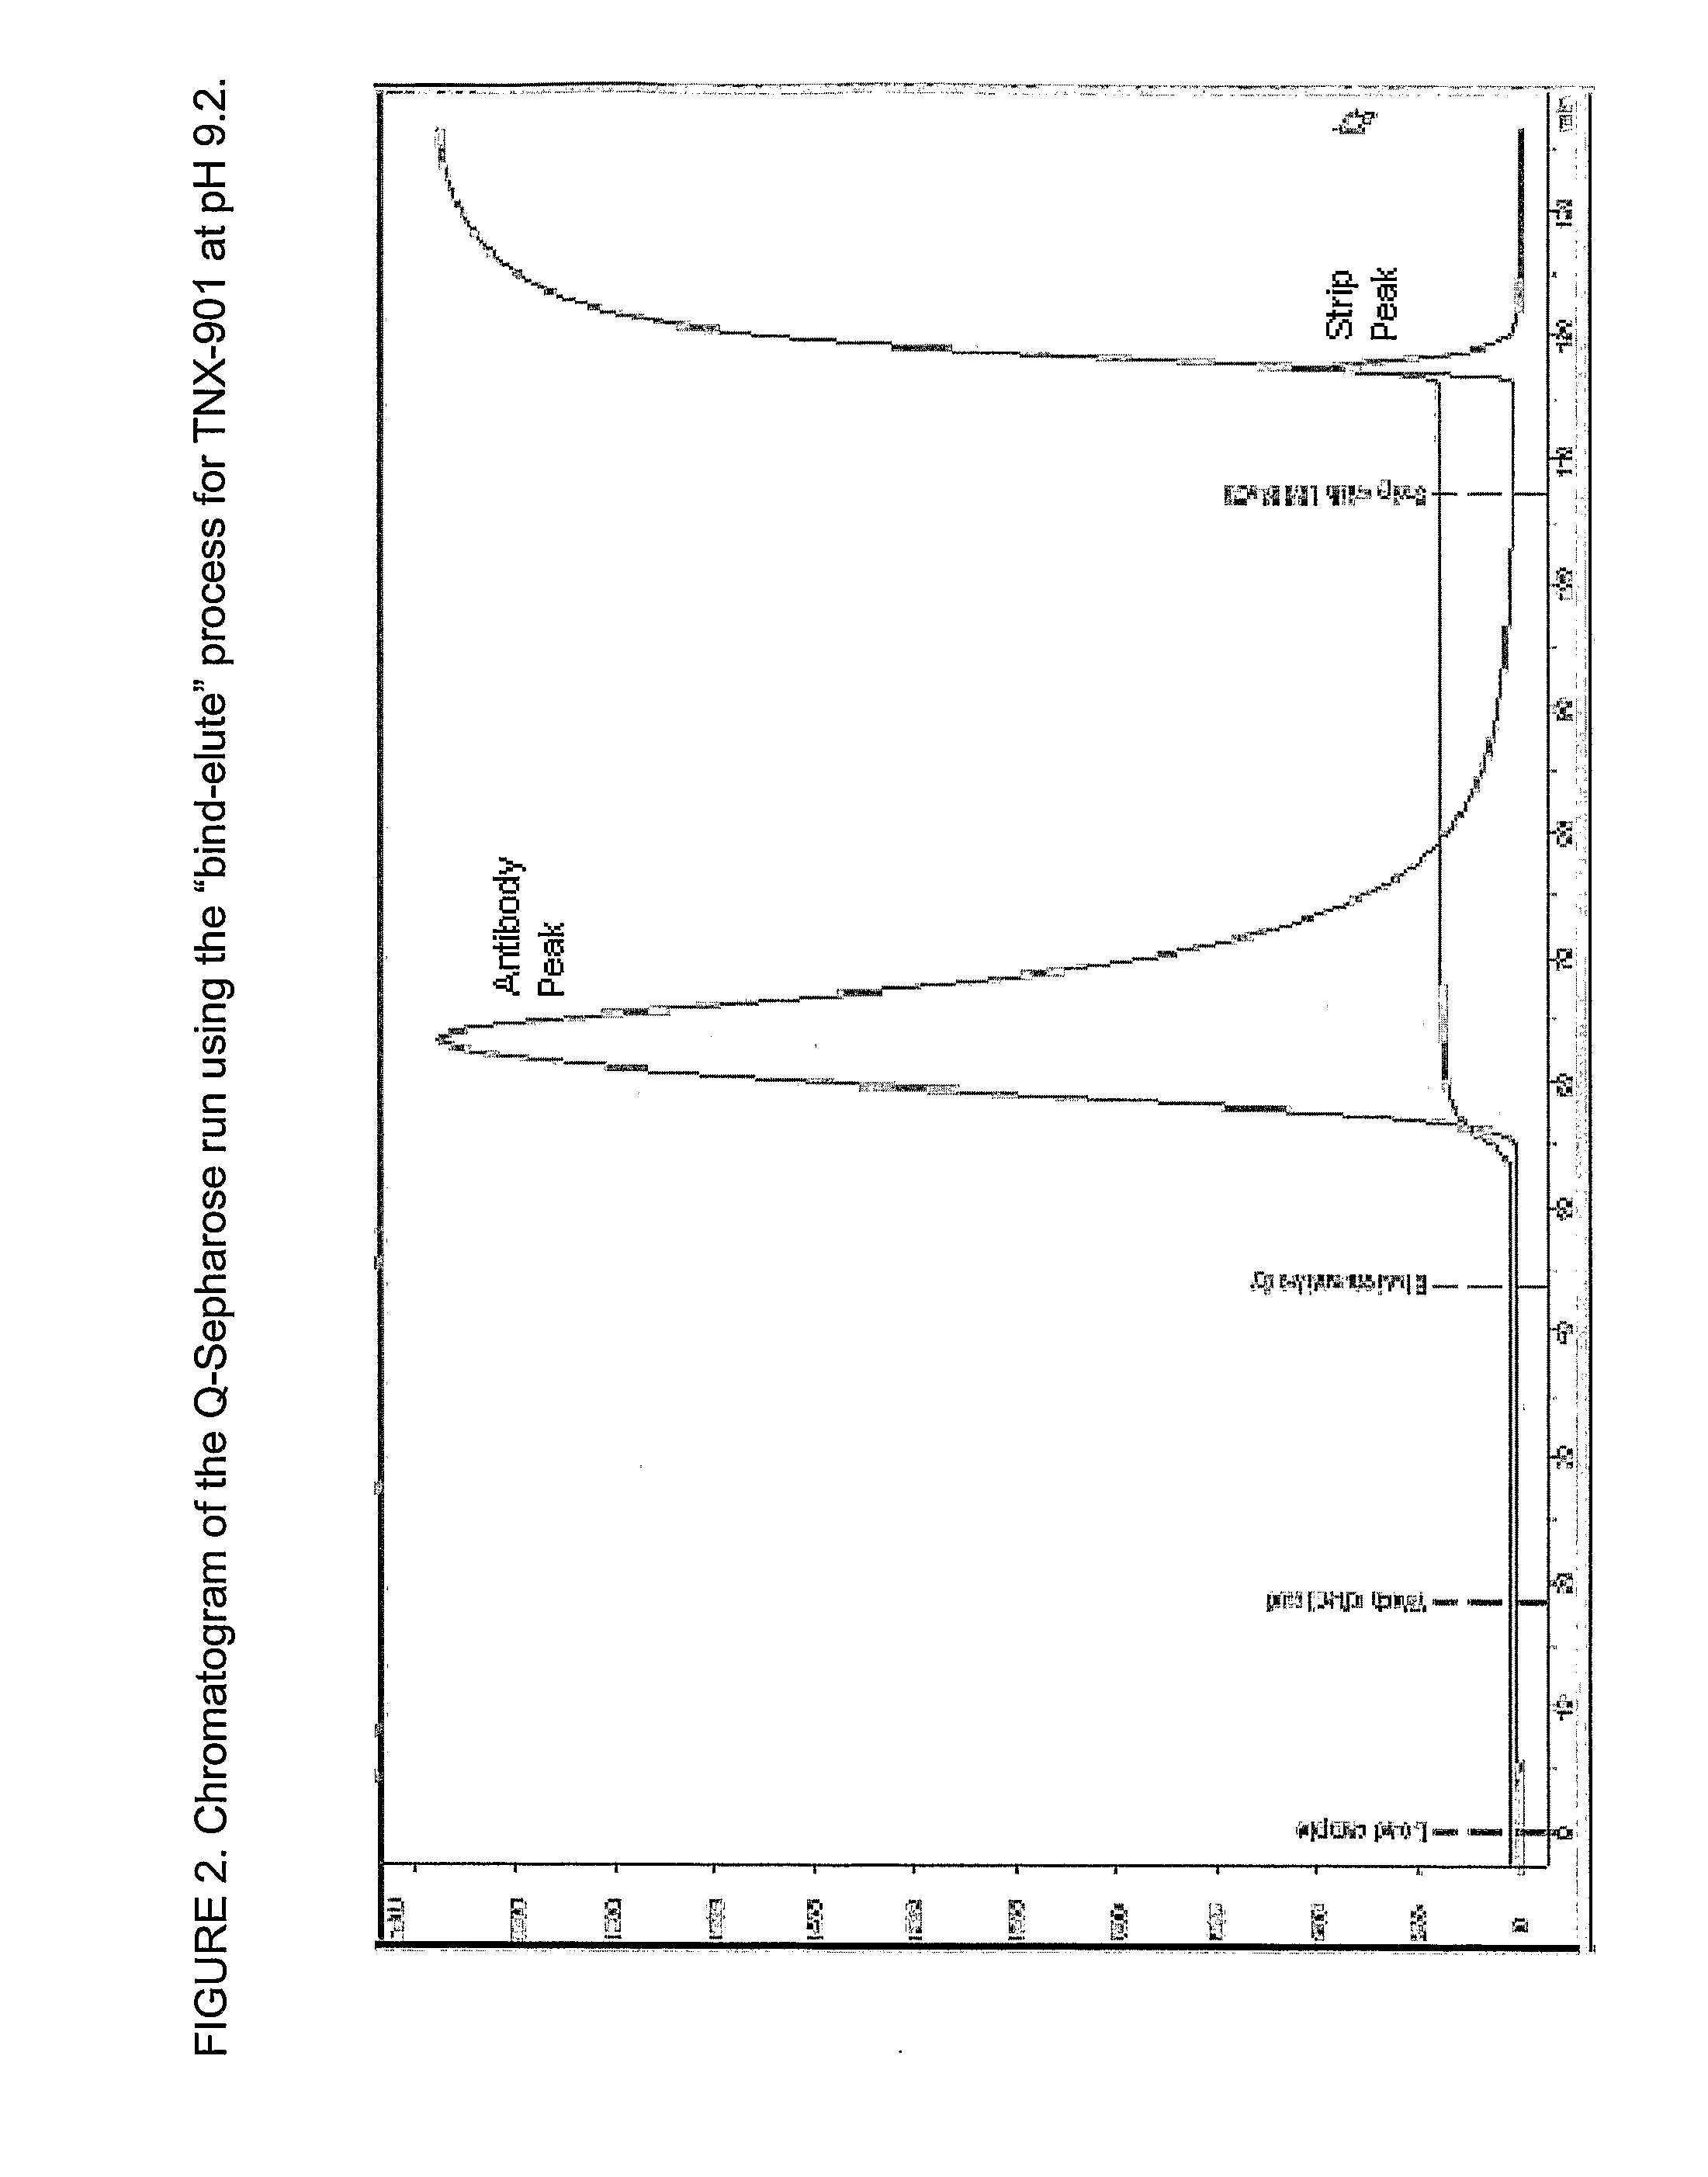 Method For The Removal Of Aggregate Proteins From Recombinant Samples Using Ion Exchange Chromatography